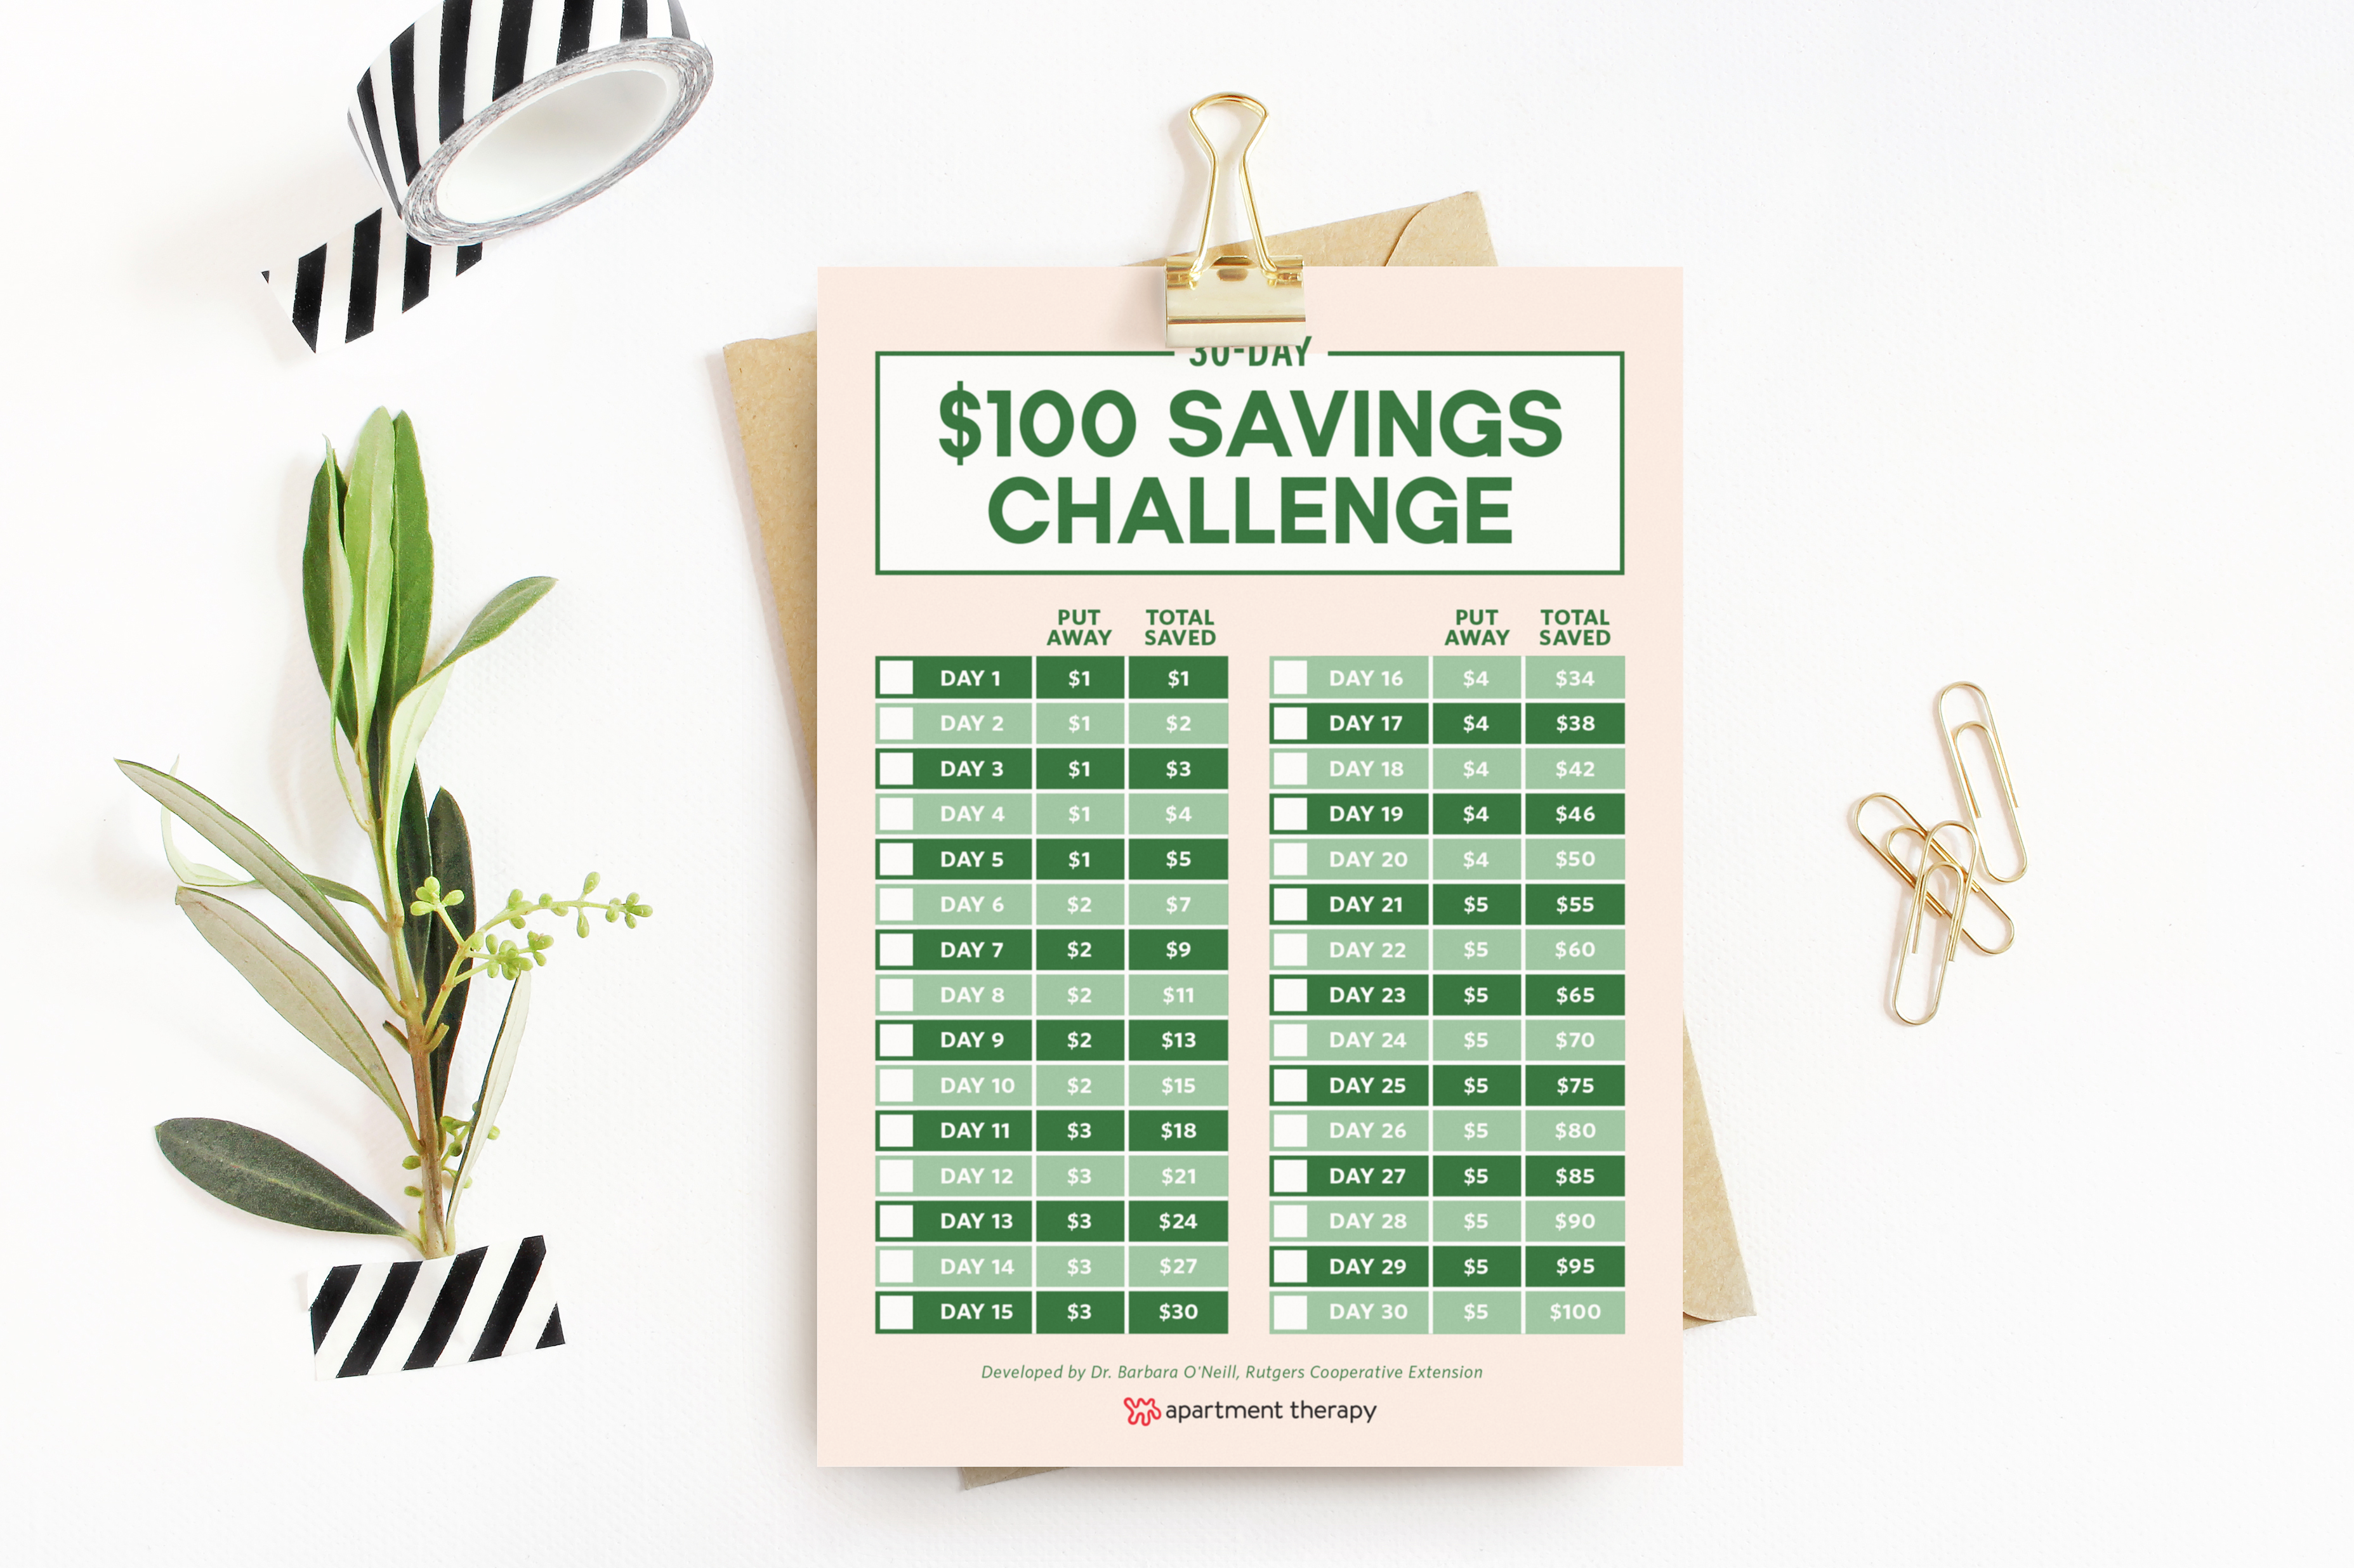 5 EASY Savings Challenges That Will Help You Save THOUSANDS [FREE